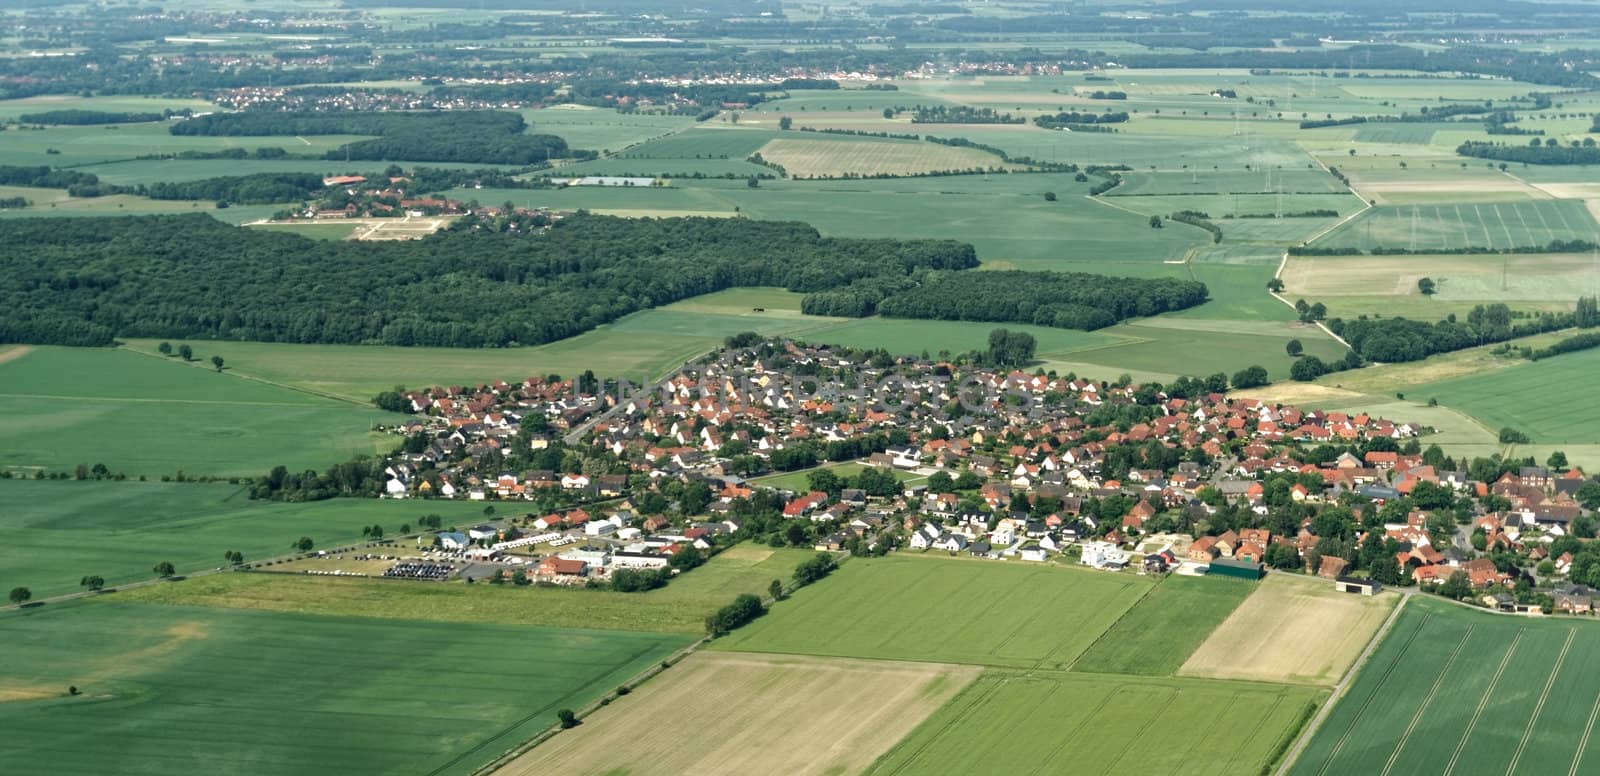 Aerial view from a small airplane from a village near Braunschweig with fields, meadows, farmland and small forests in the area, Germany